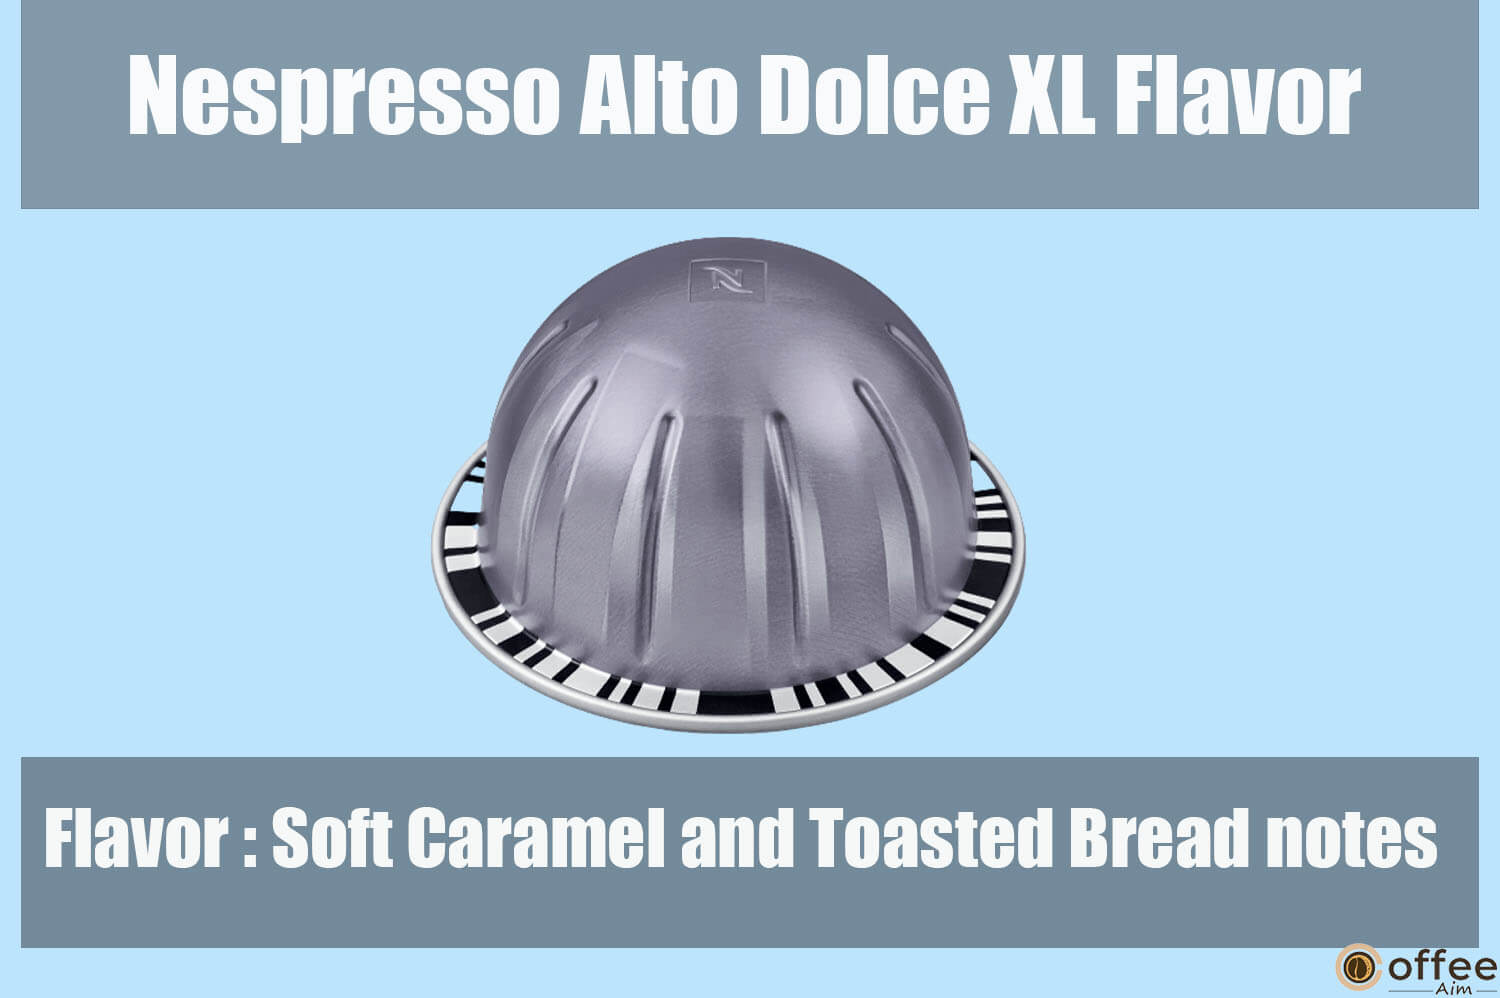 The image captures the rich flavor profile of the Nespresso Alto Dolce XL vertuo capsule, showcased for the "Nespresso Alto Dolce XL Review" article.